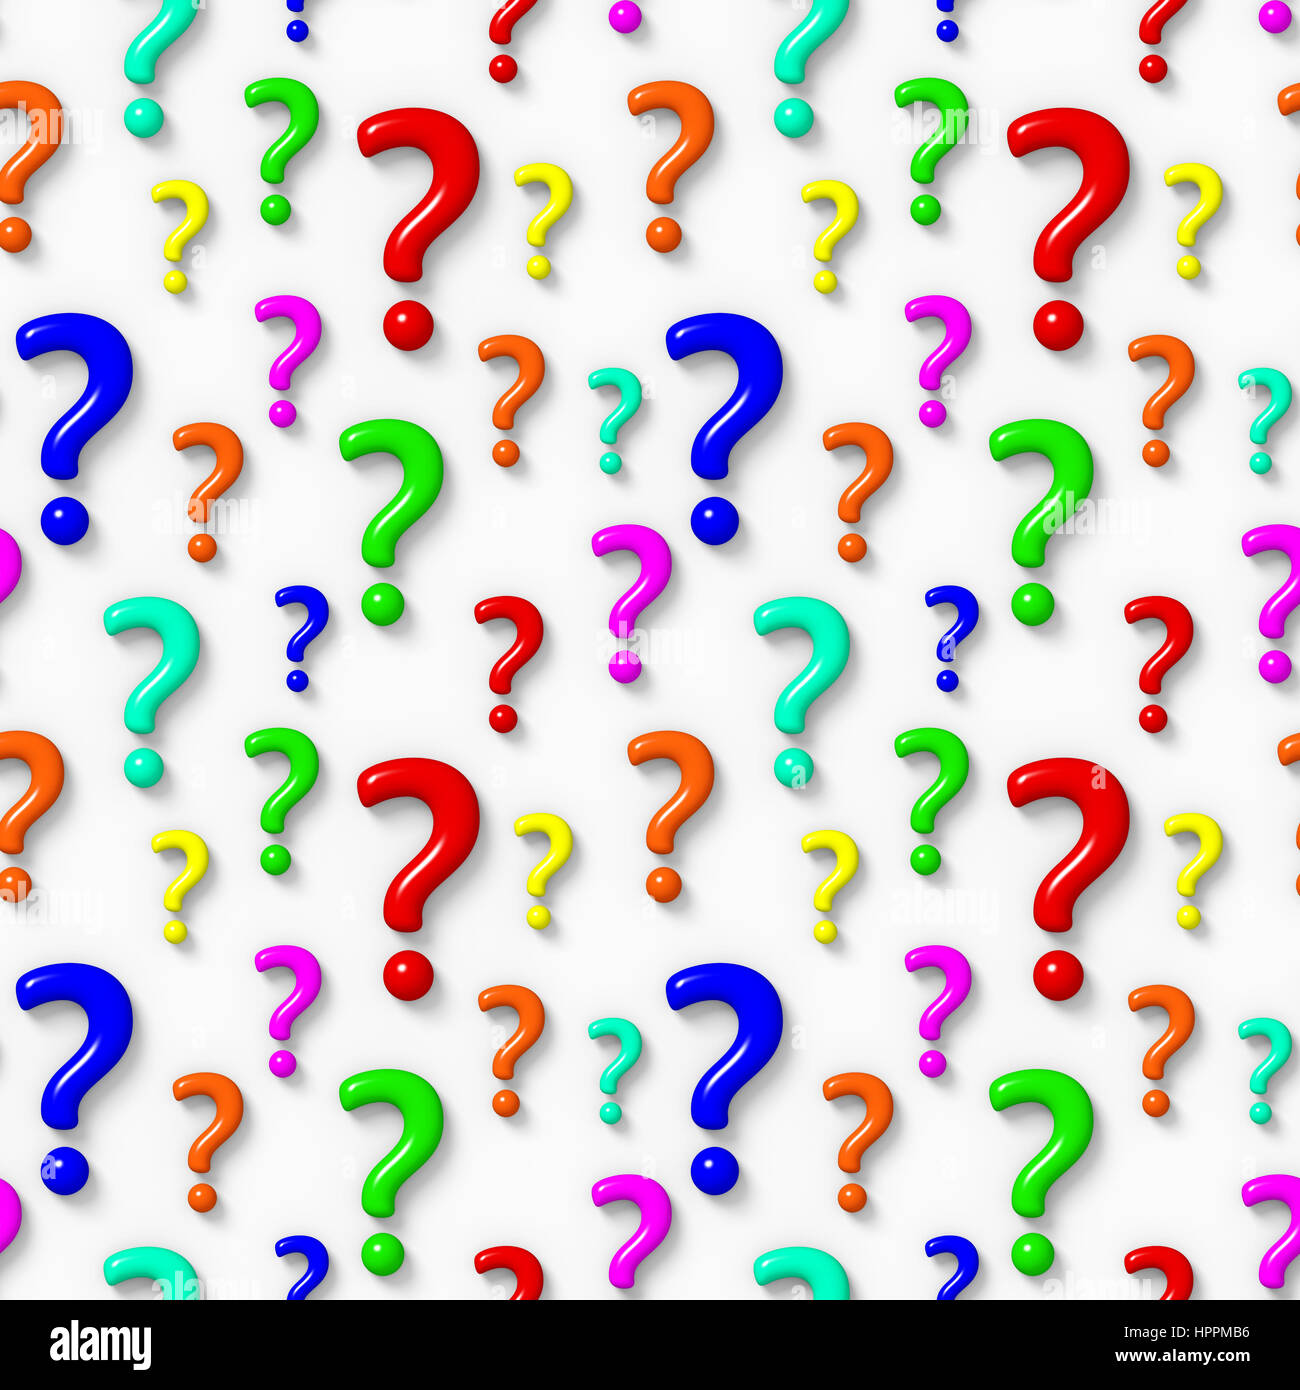 Seamless 3d Background With Colourful Question Marks Stock Photo